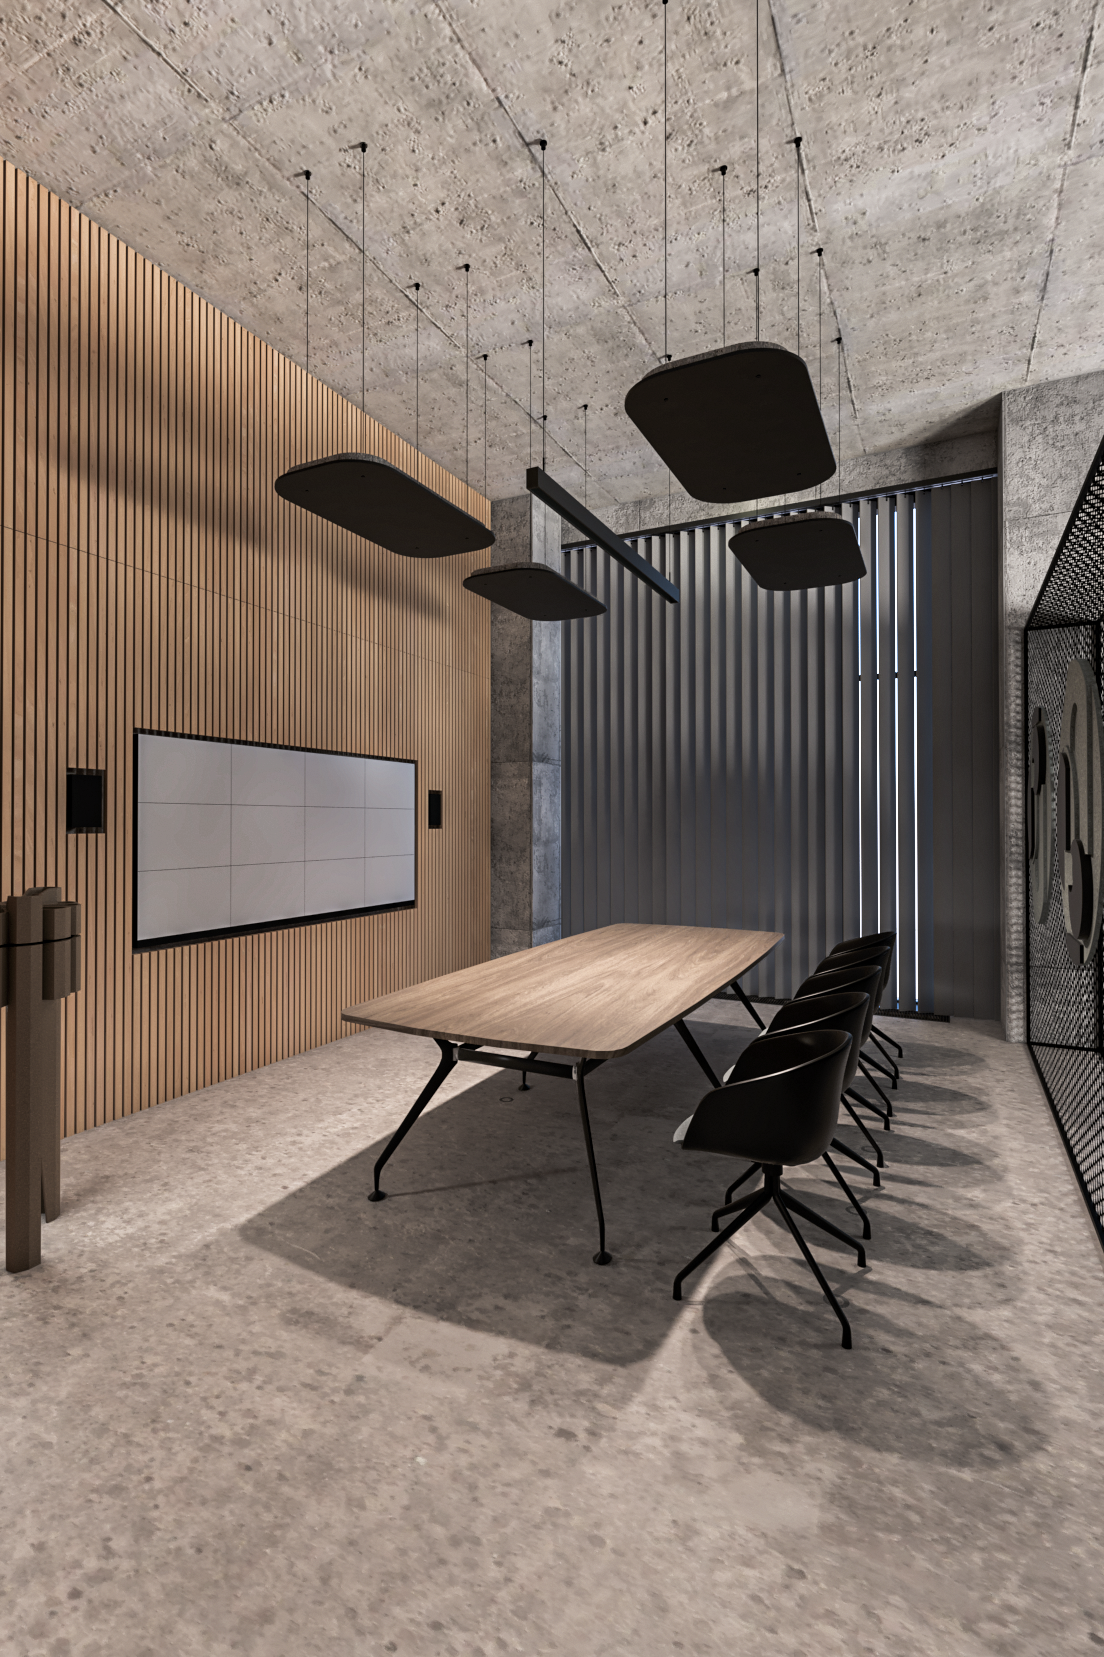 Sound absorbing acoustic islands on the ceiling